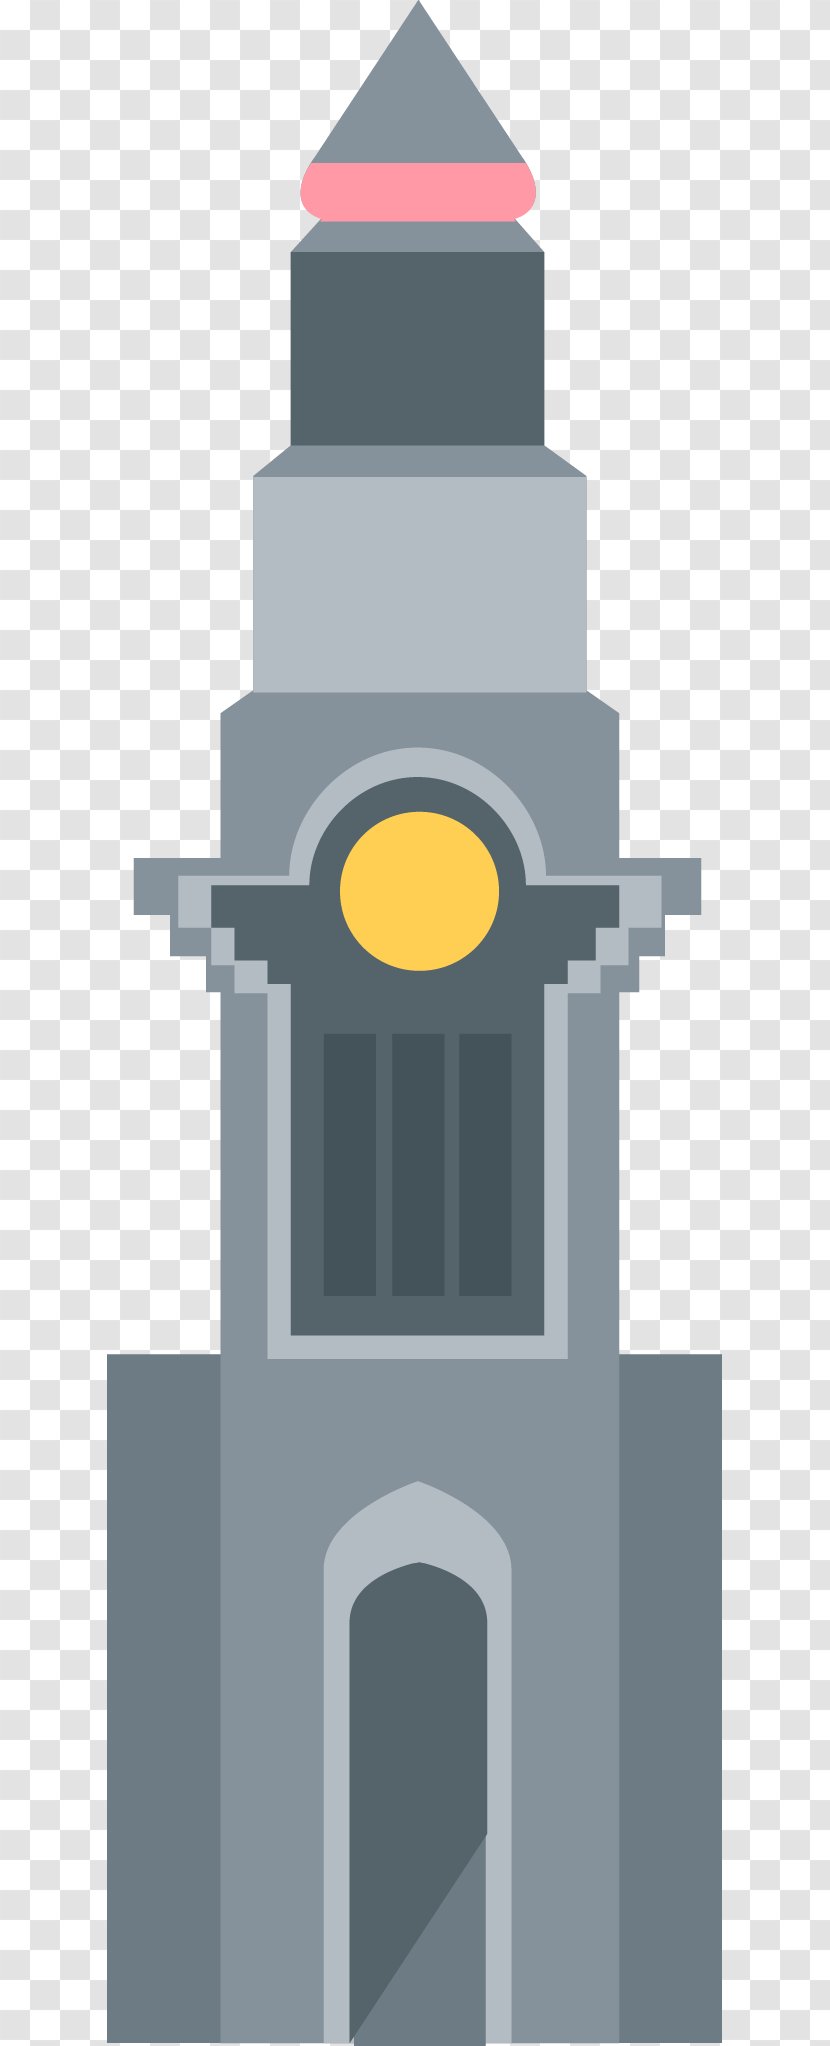 Euclidean Vector Gothic Architecture Icon - Art - Cathedral Of Gray Material Transparent PNG